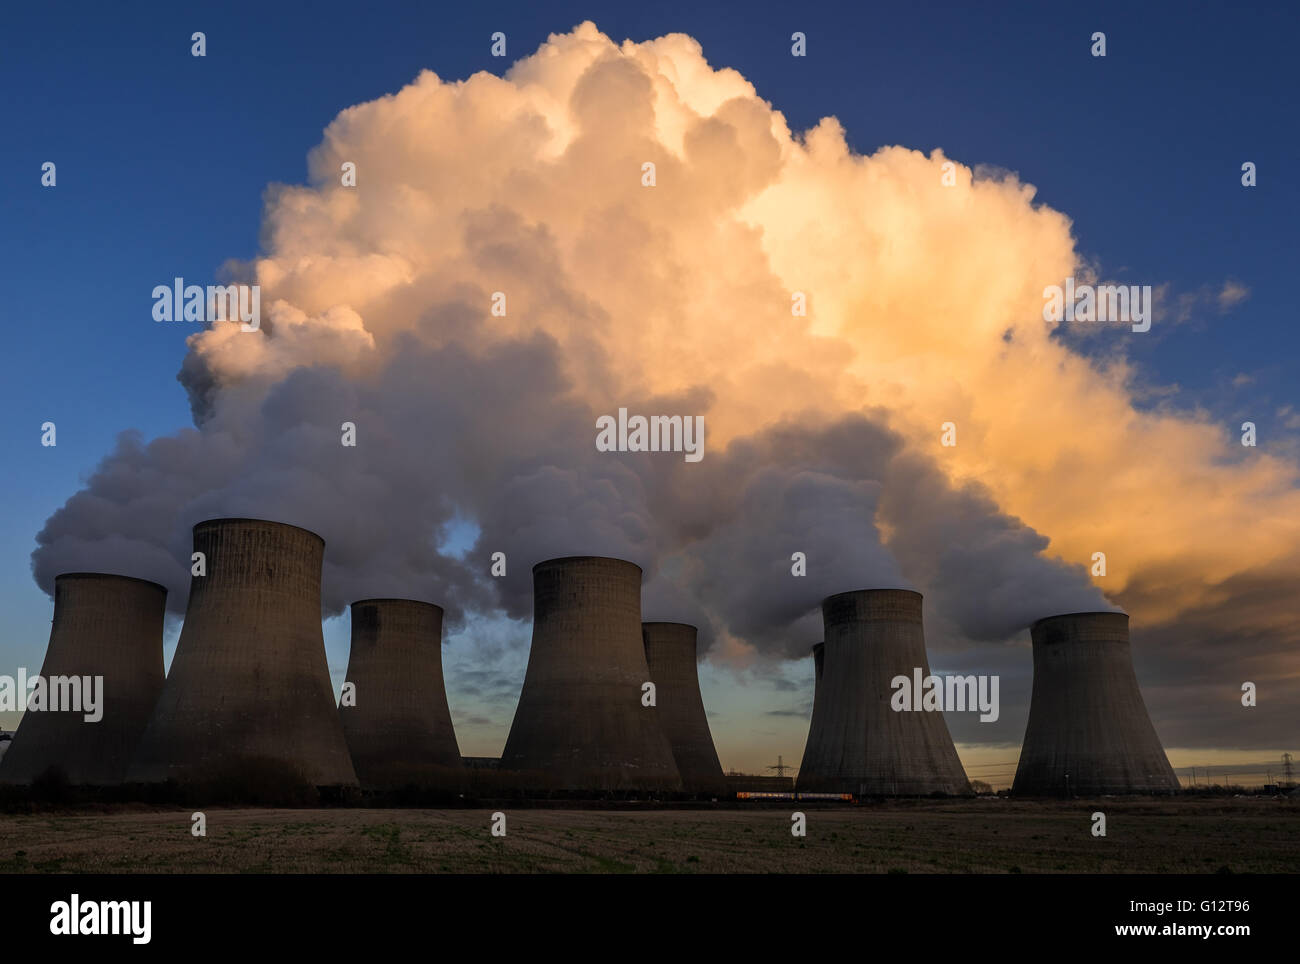 Cooling towers of Ratcliffe power station in the UK Stock Photo